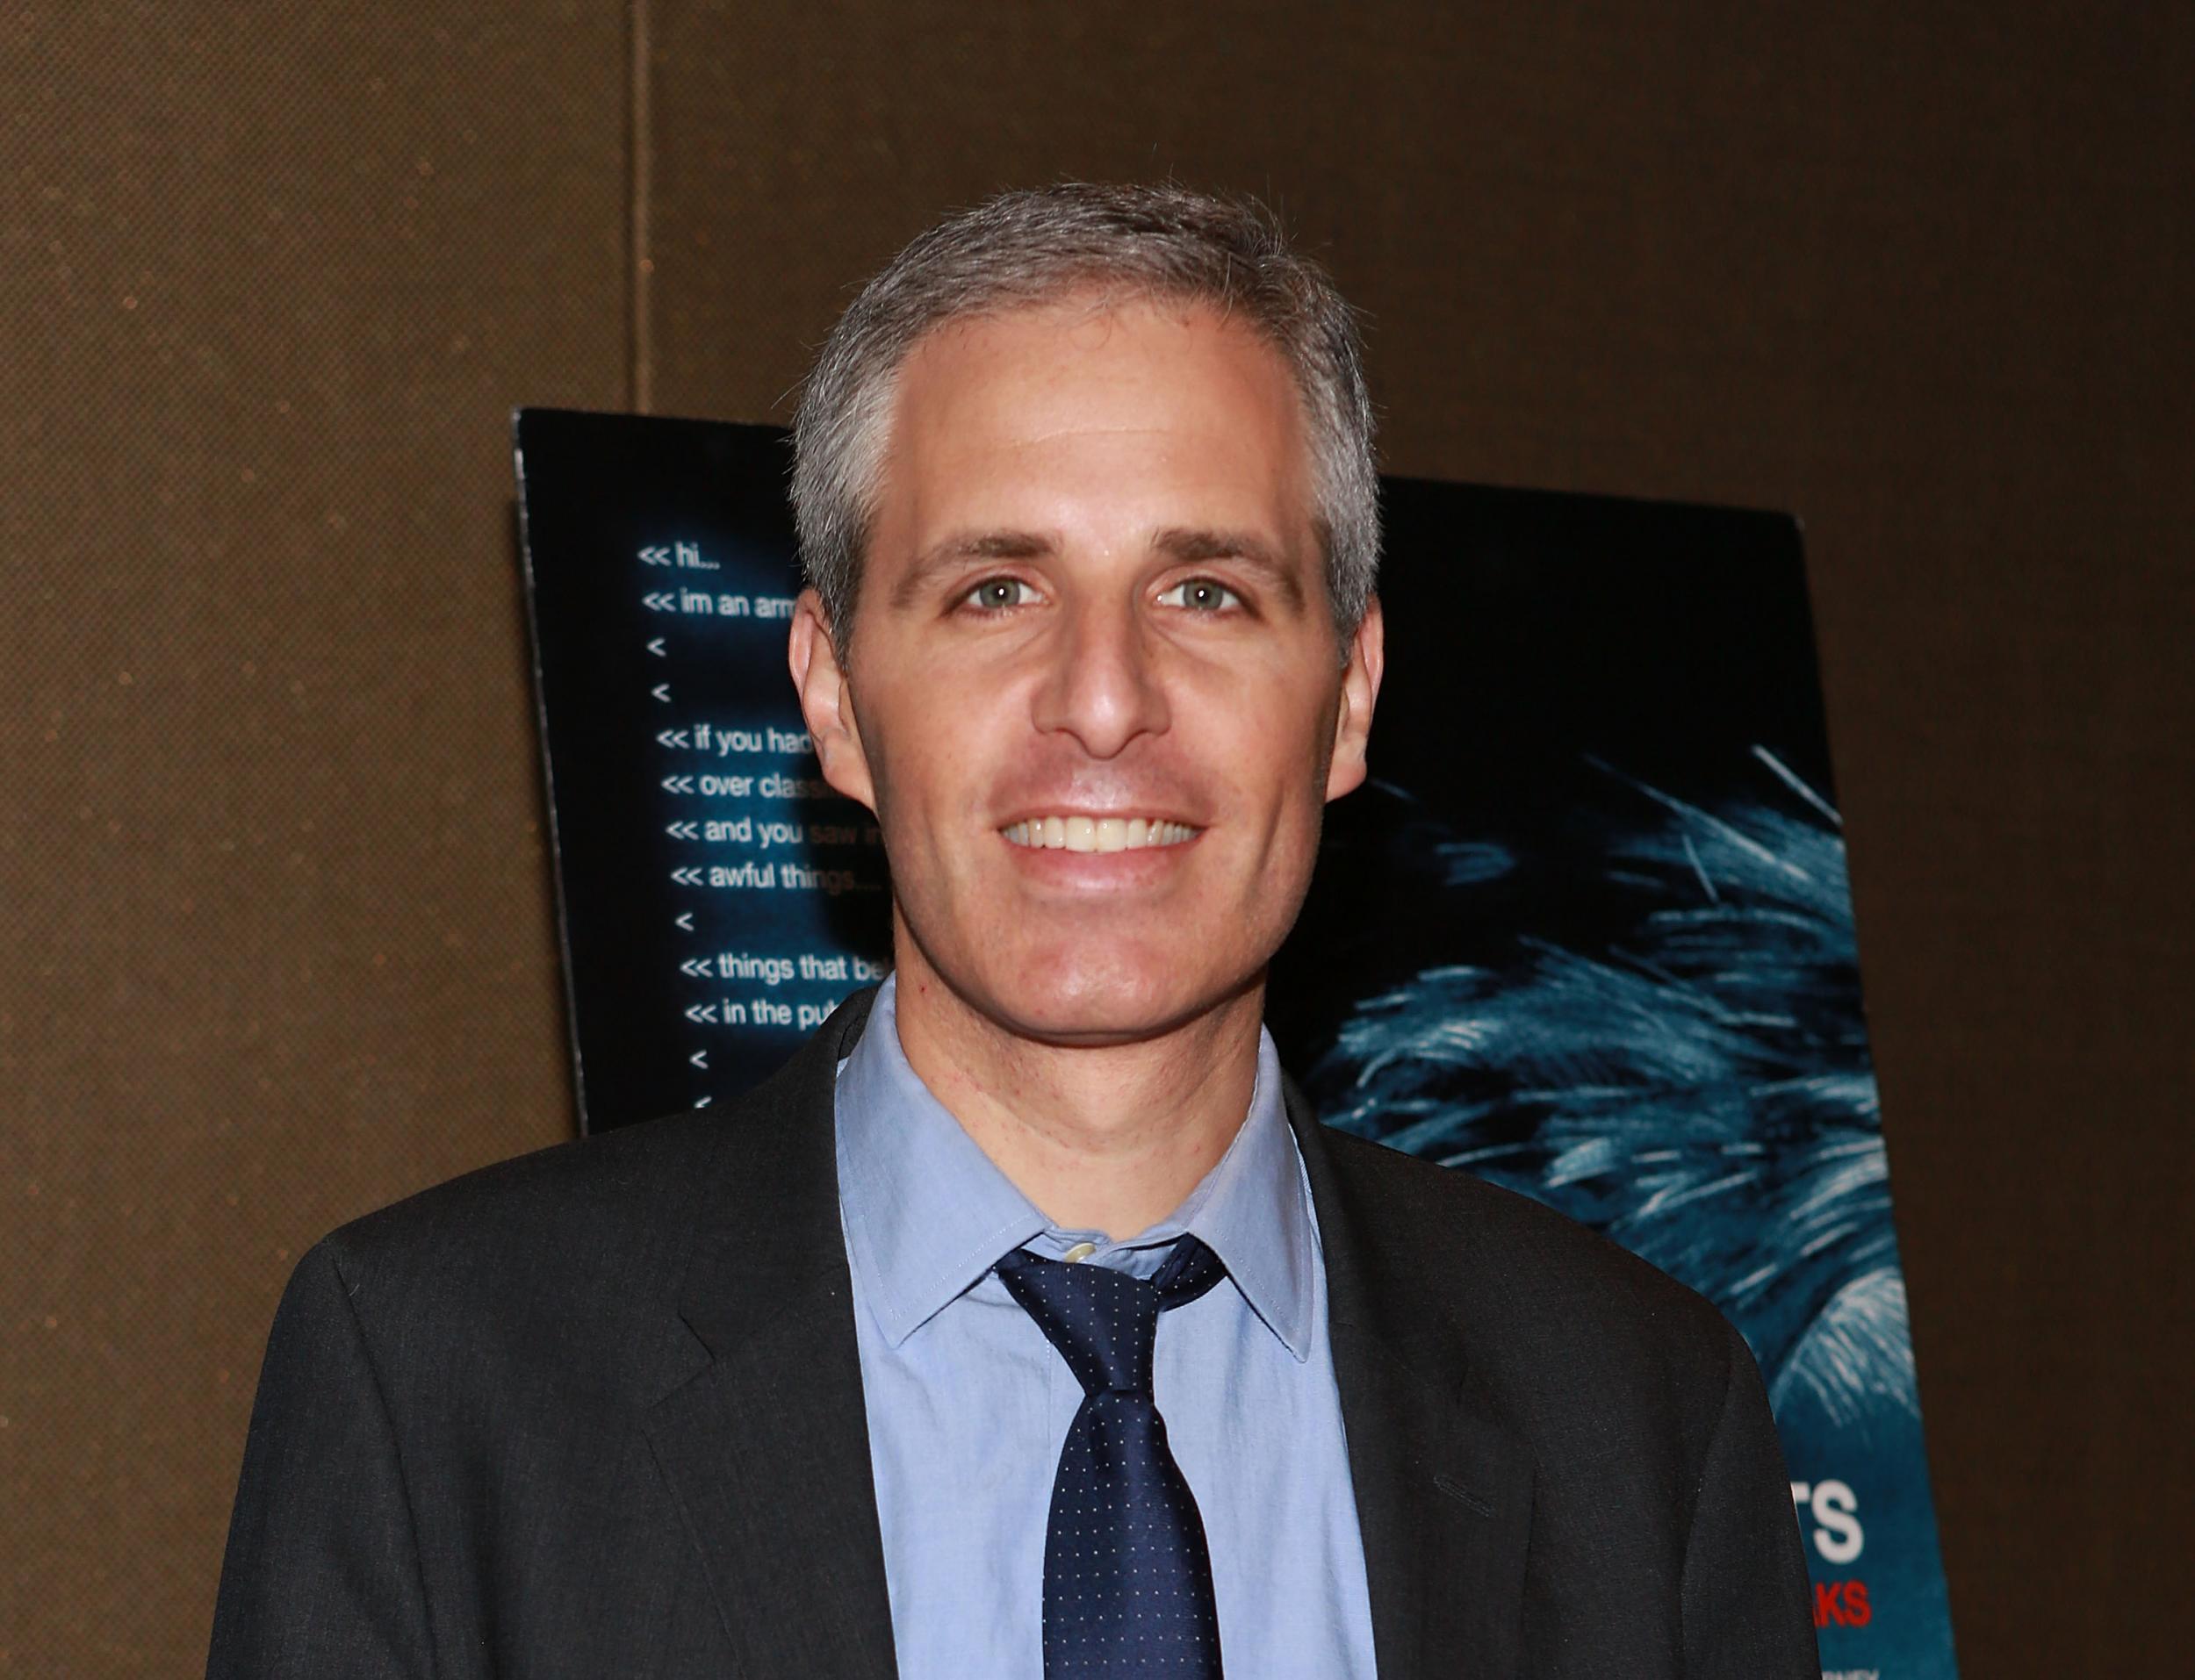 There was a backlash to Mr Sirota's hiring by the campaign